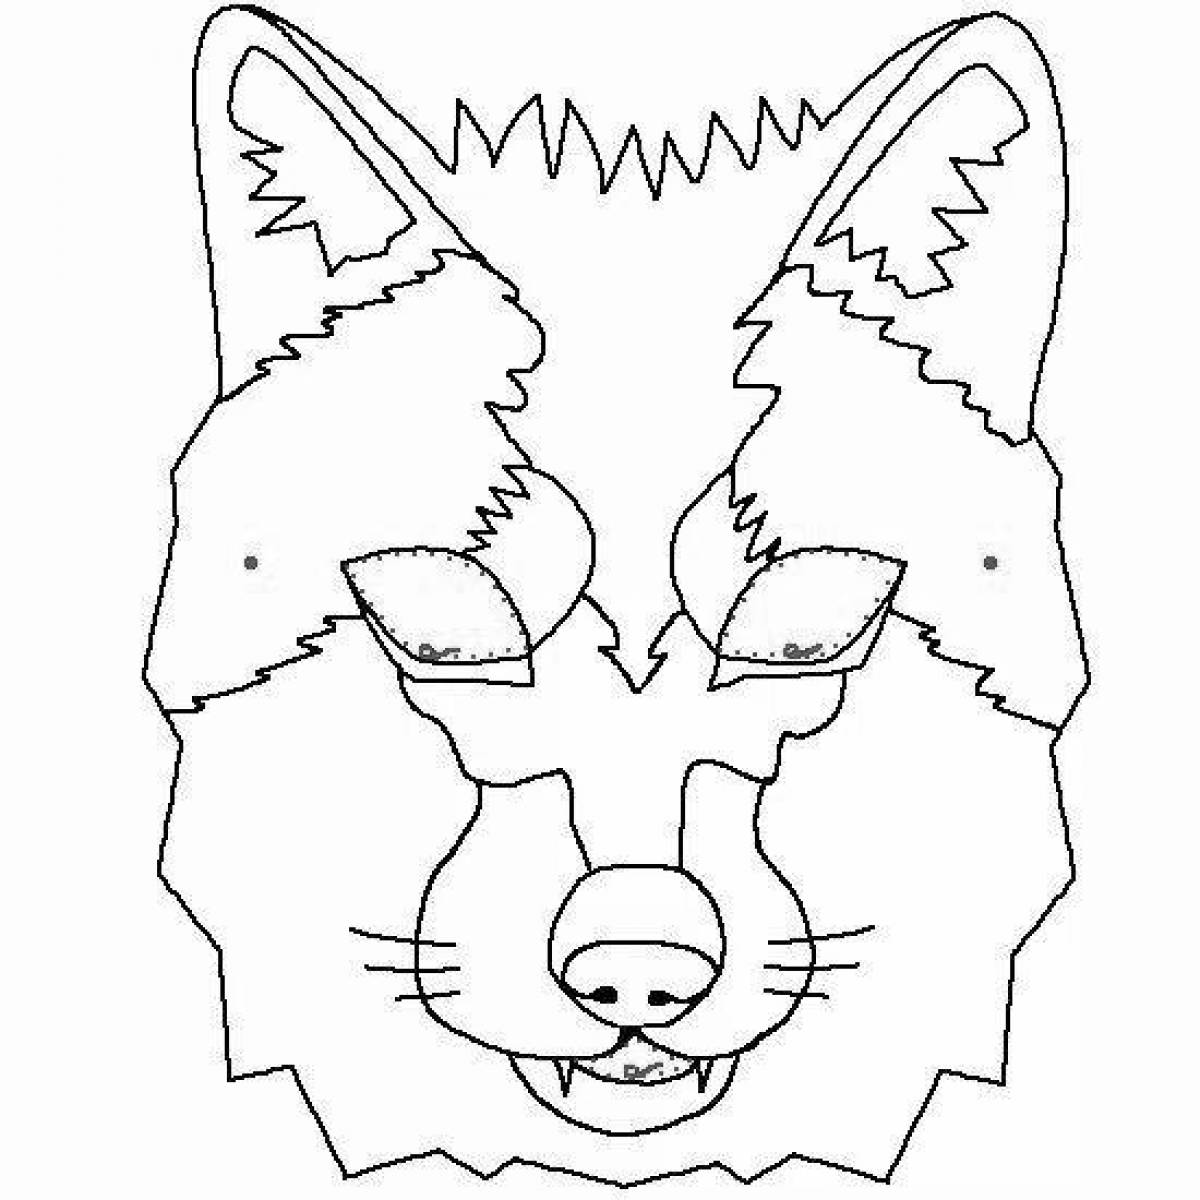 Excellent wolf mask coloring book